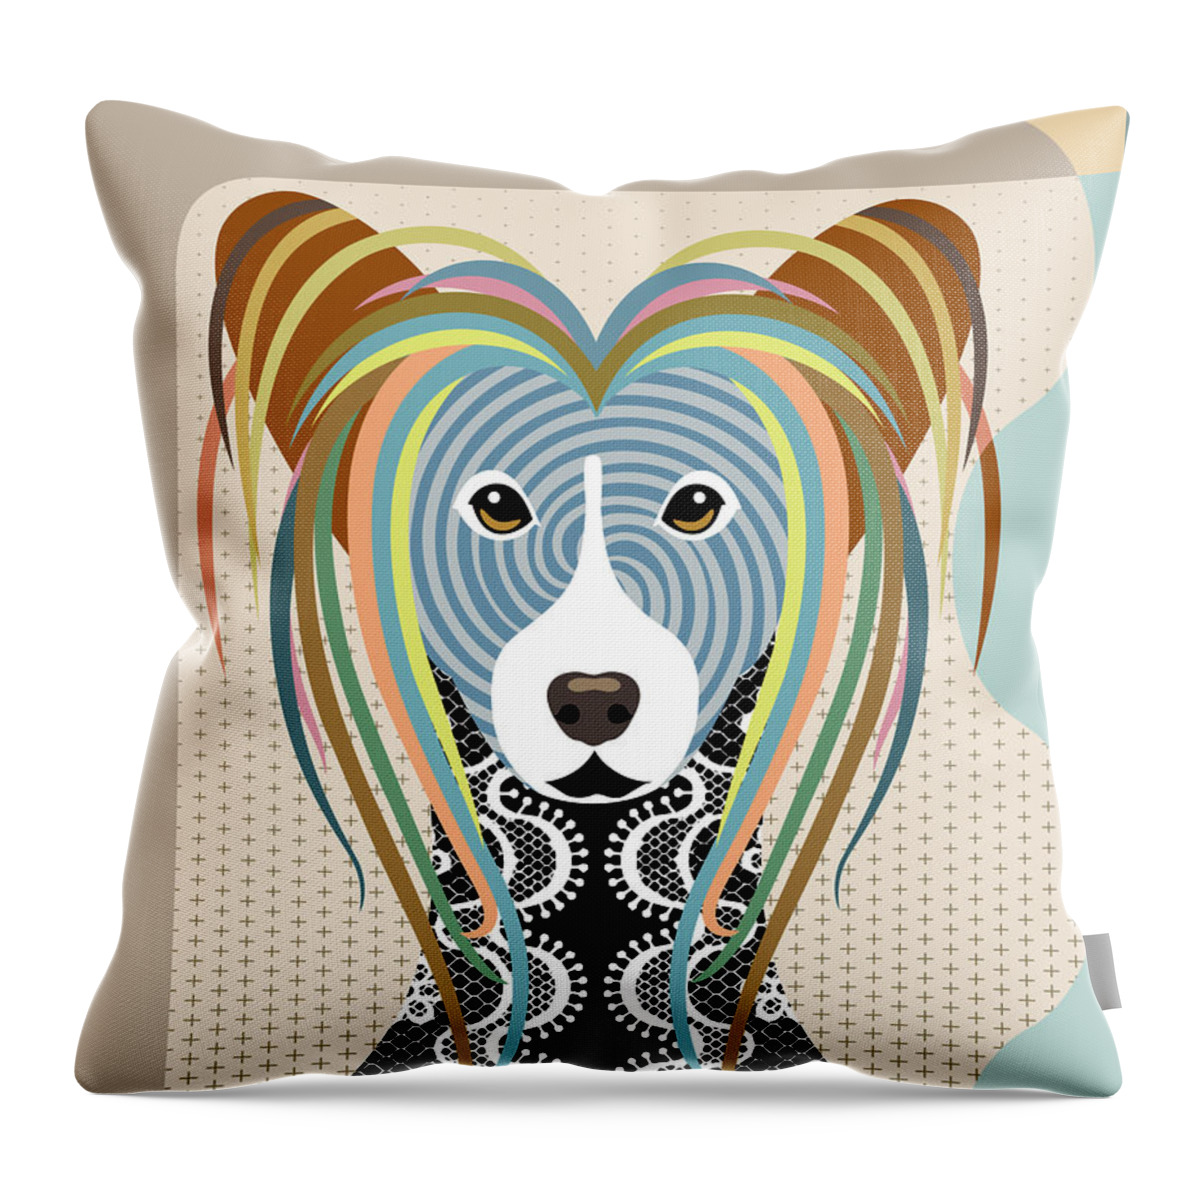 Chinese Crested Dog Throw Pillow featuring the digital art Chinese Crested by Lanre Studio